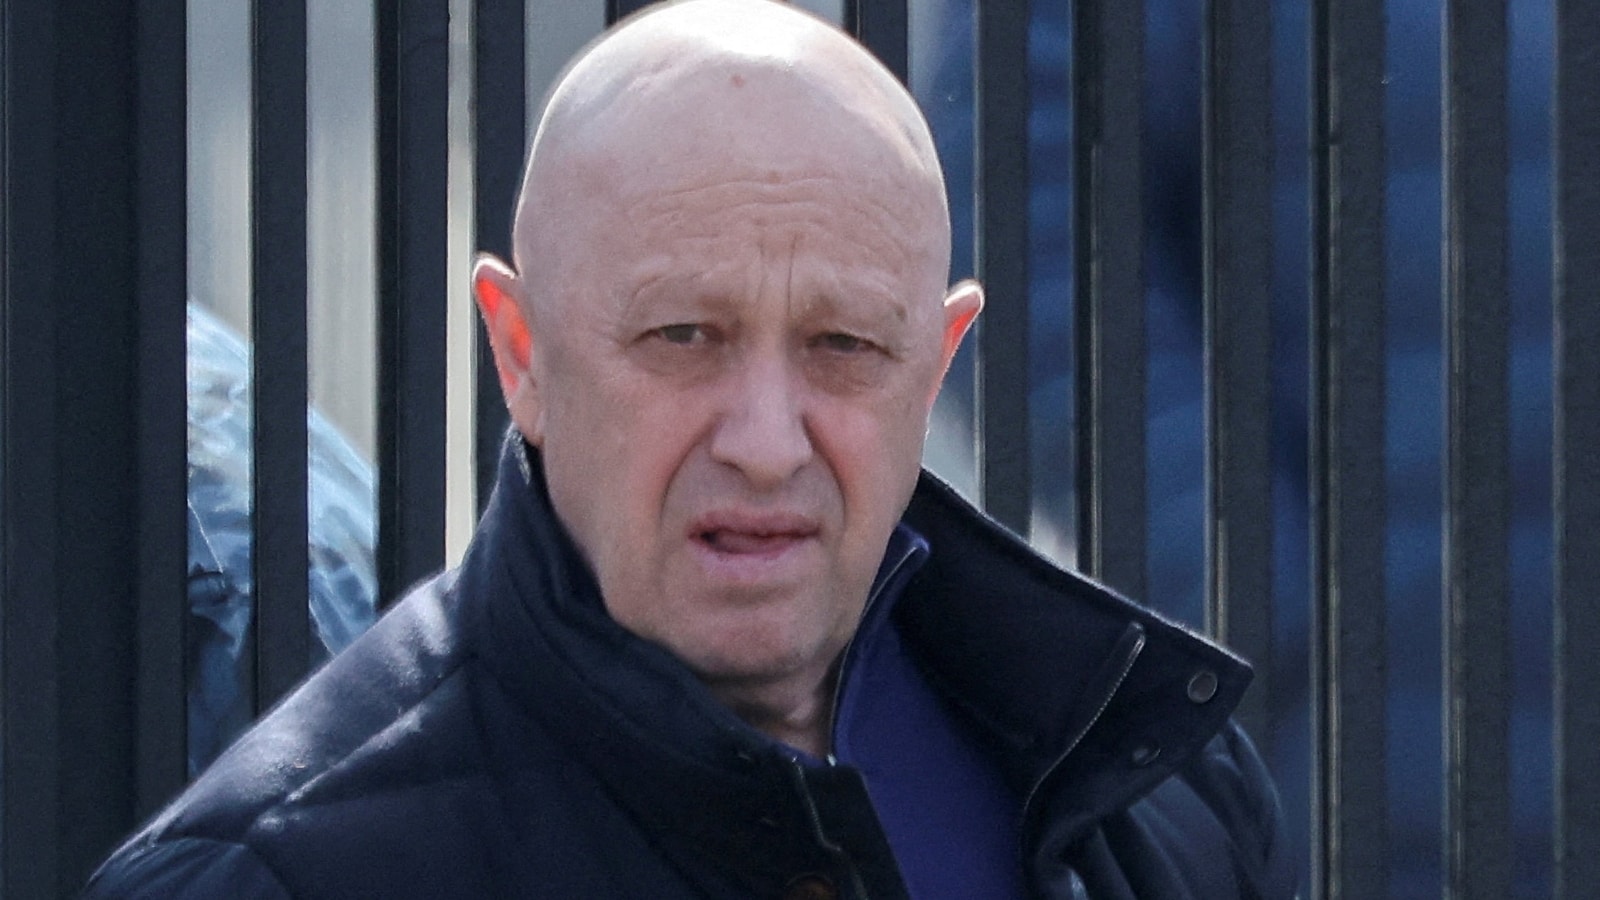 'Absolute lie': Russia on claims of killing Wagner chief Yevgeny Prigozhin